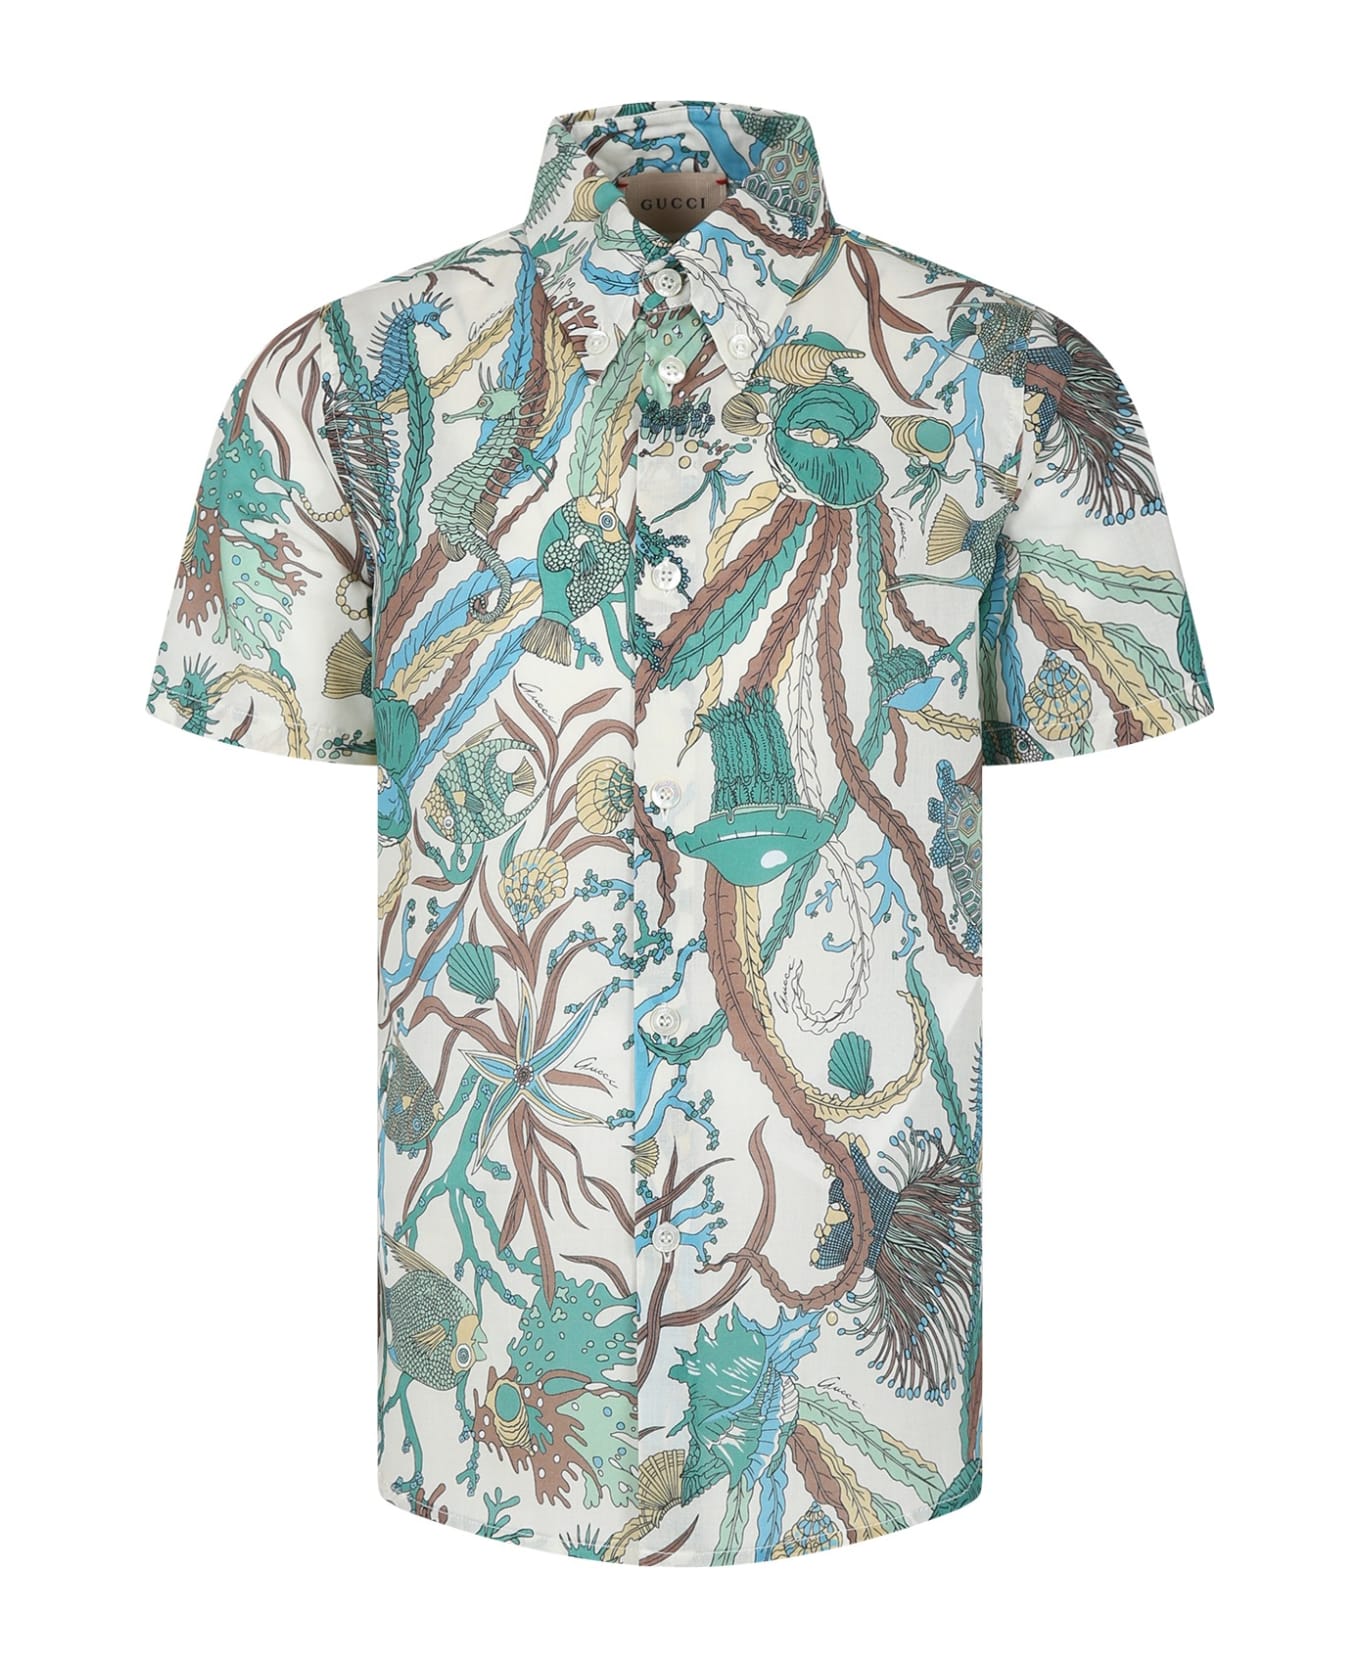 Gucci Ivory Shirt For Boy With Marine Print - Multicolor シャツ